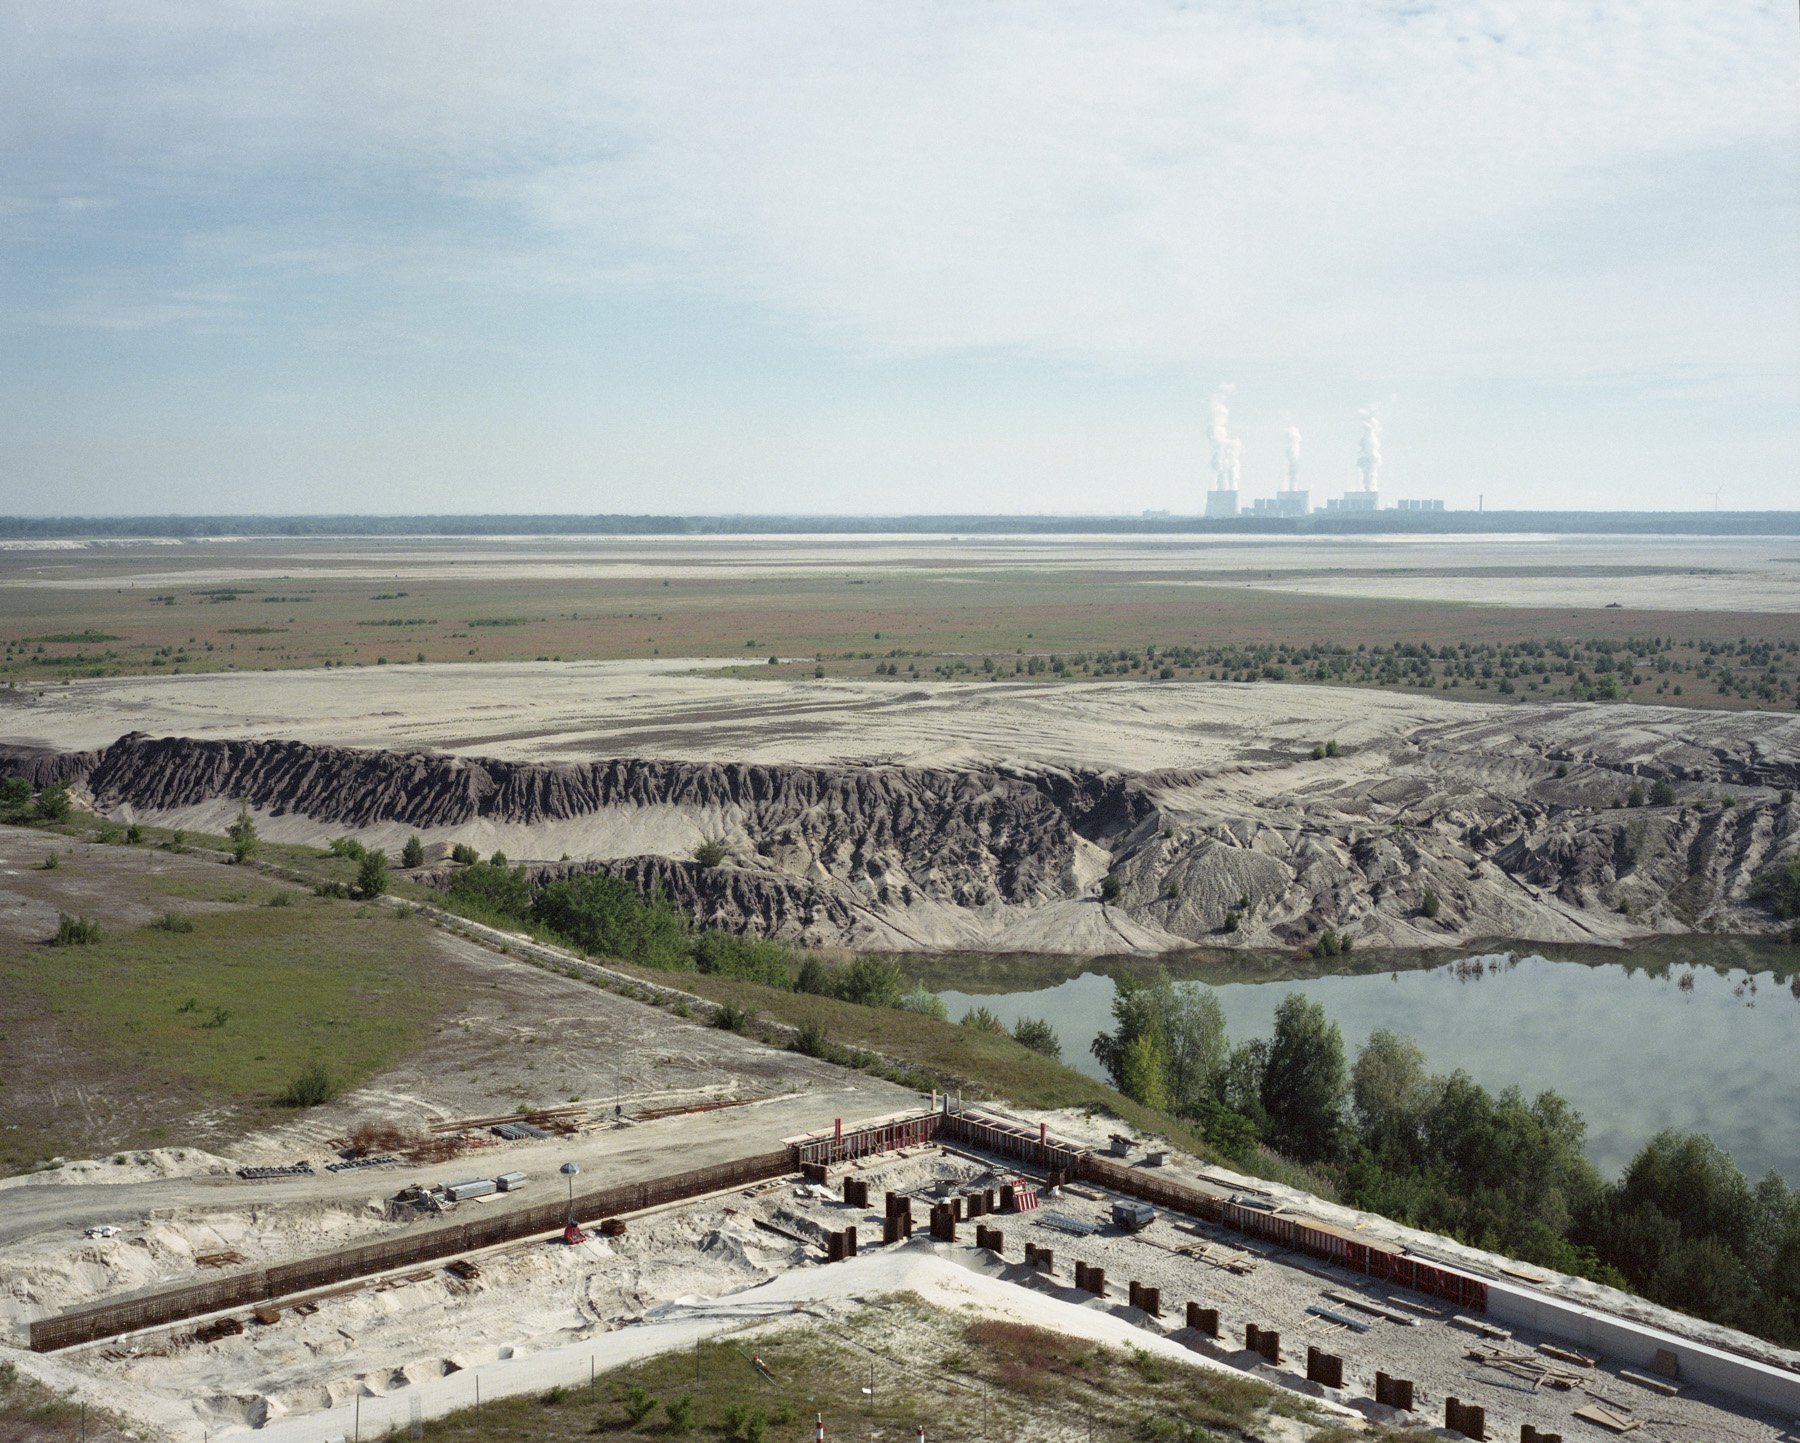  Germany, Boxberg. 2019. A view of Welzow mines and power station, a lignite-fire power station. Before the German unification, it was part of the so called “Black Triangle”, a border region shared by Germany, Poland and the Czech Republic, long char